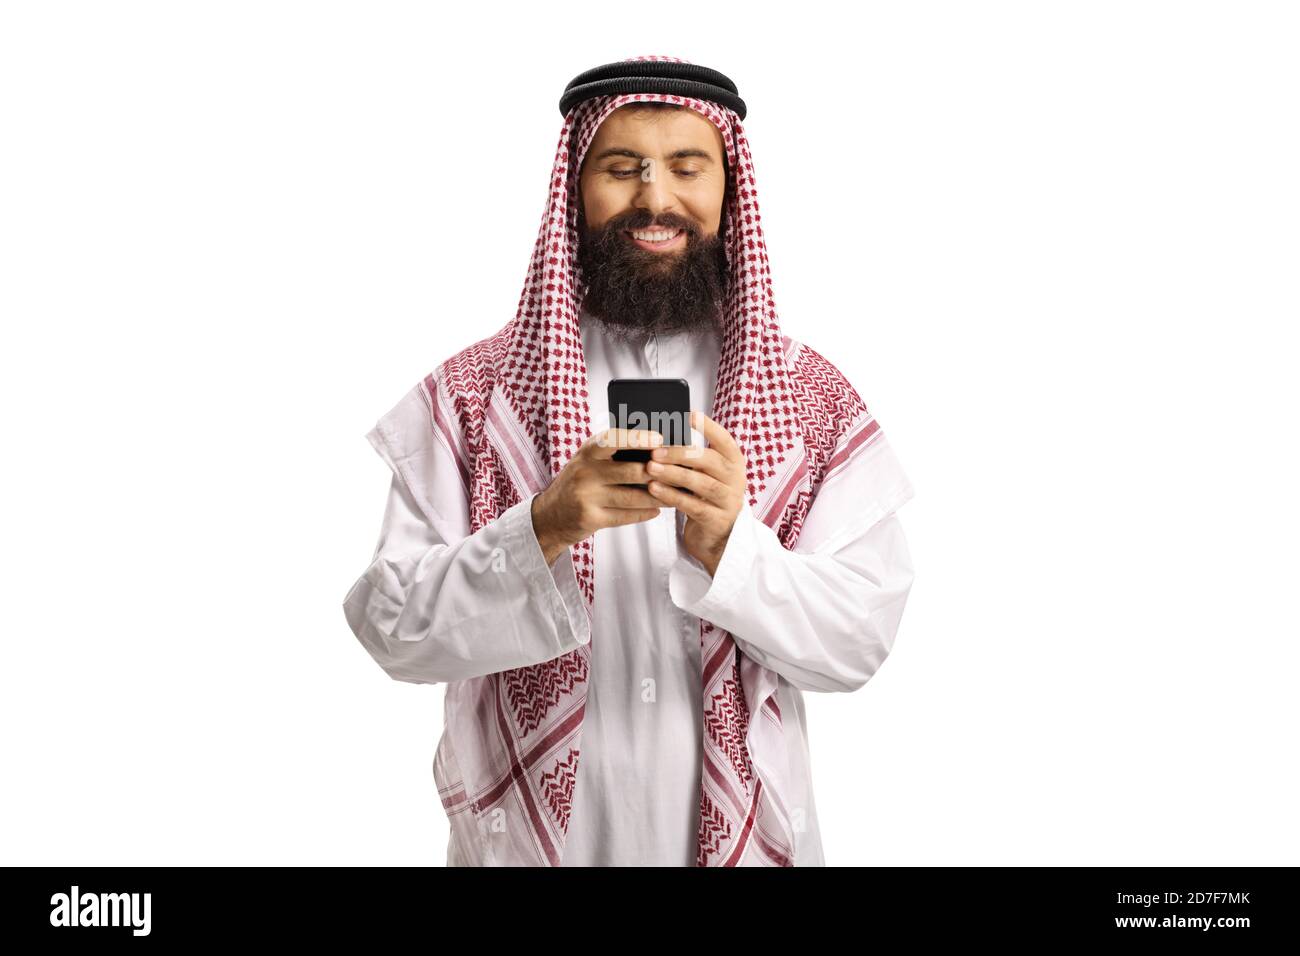 Arab man typing on a smartphone isolated on white background Stock Photo